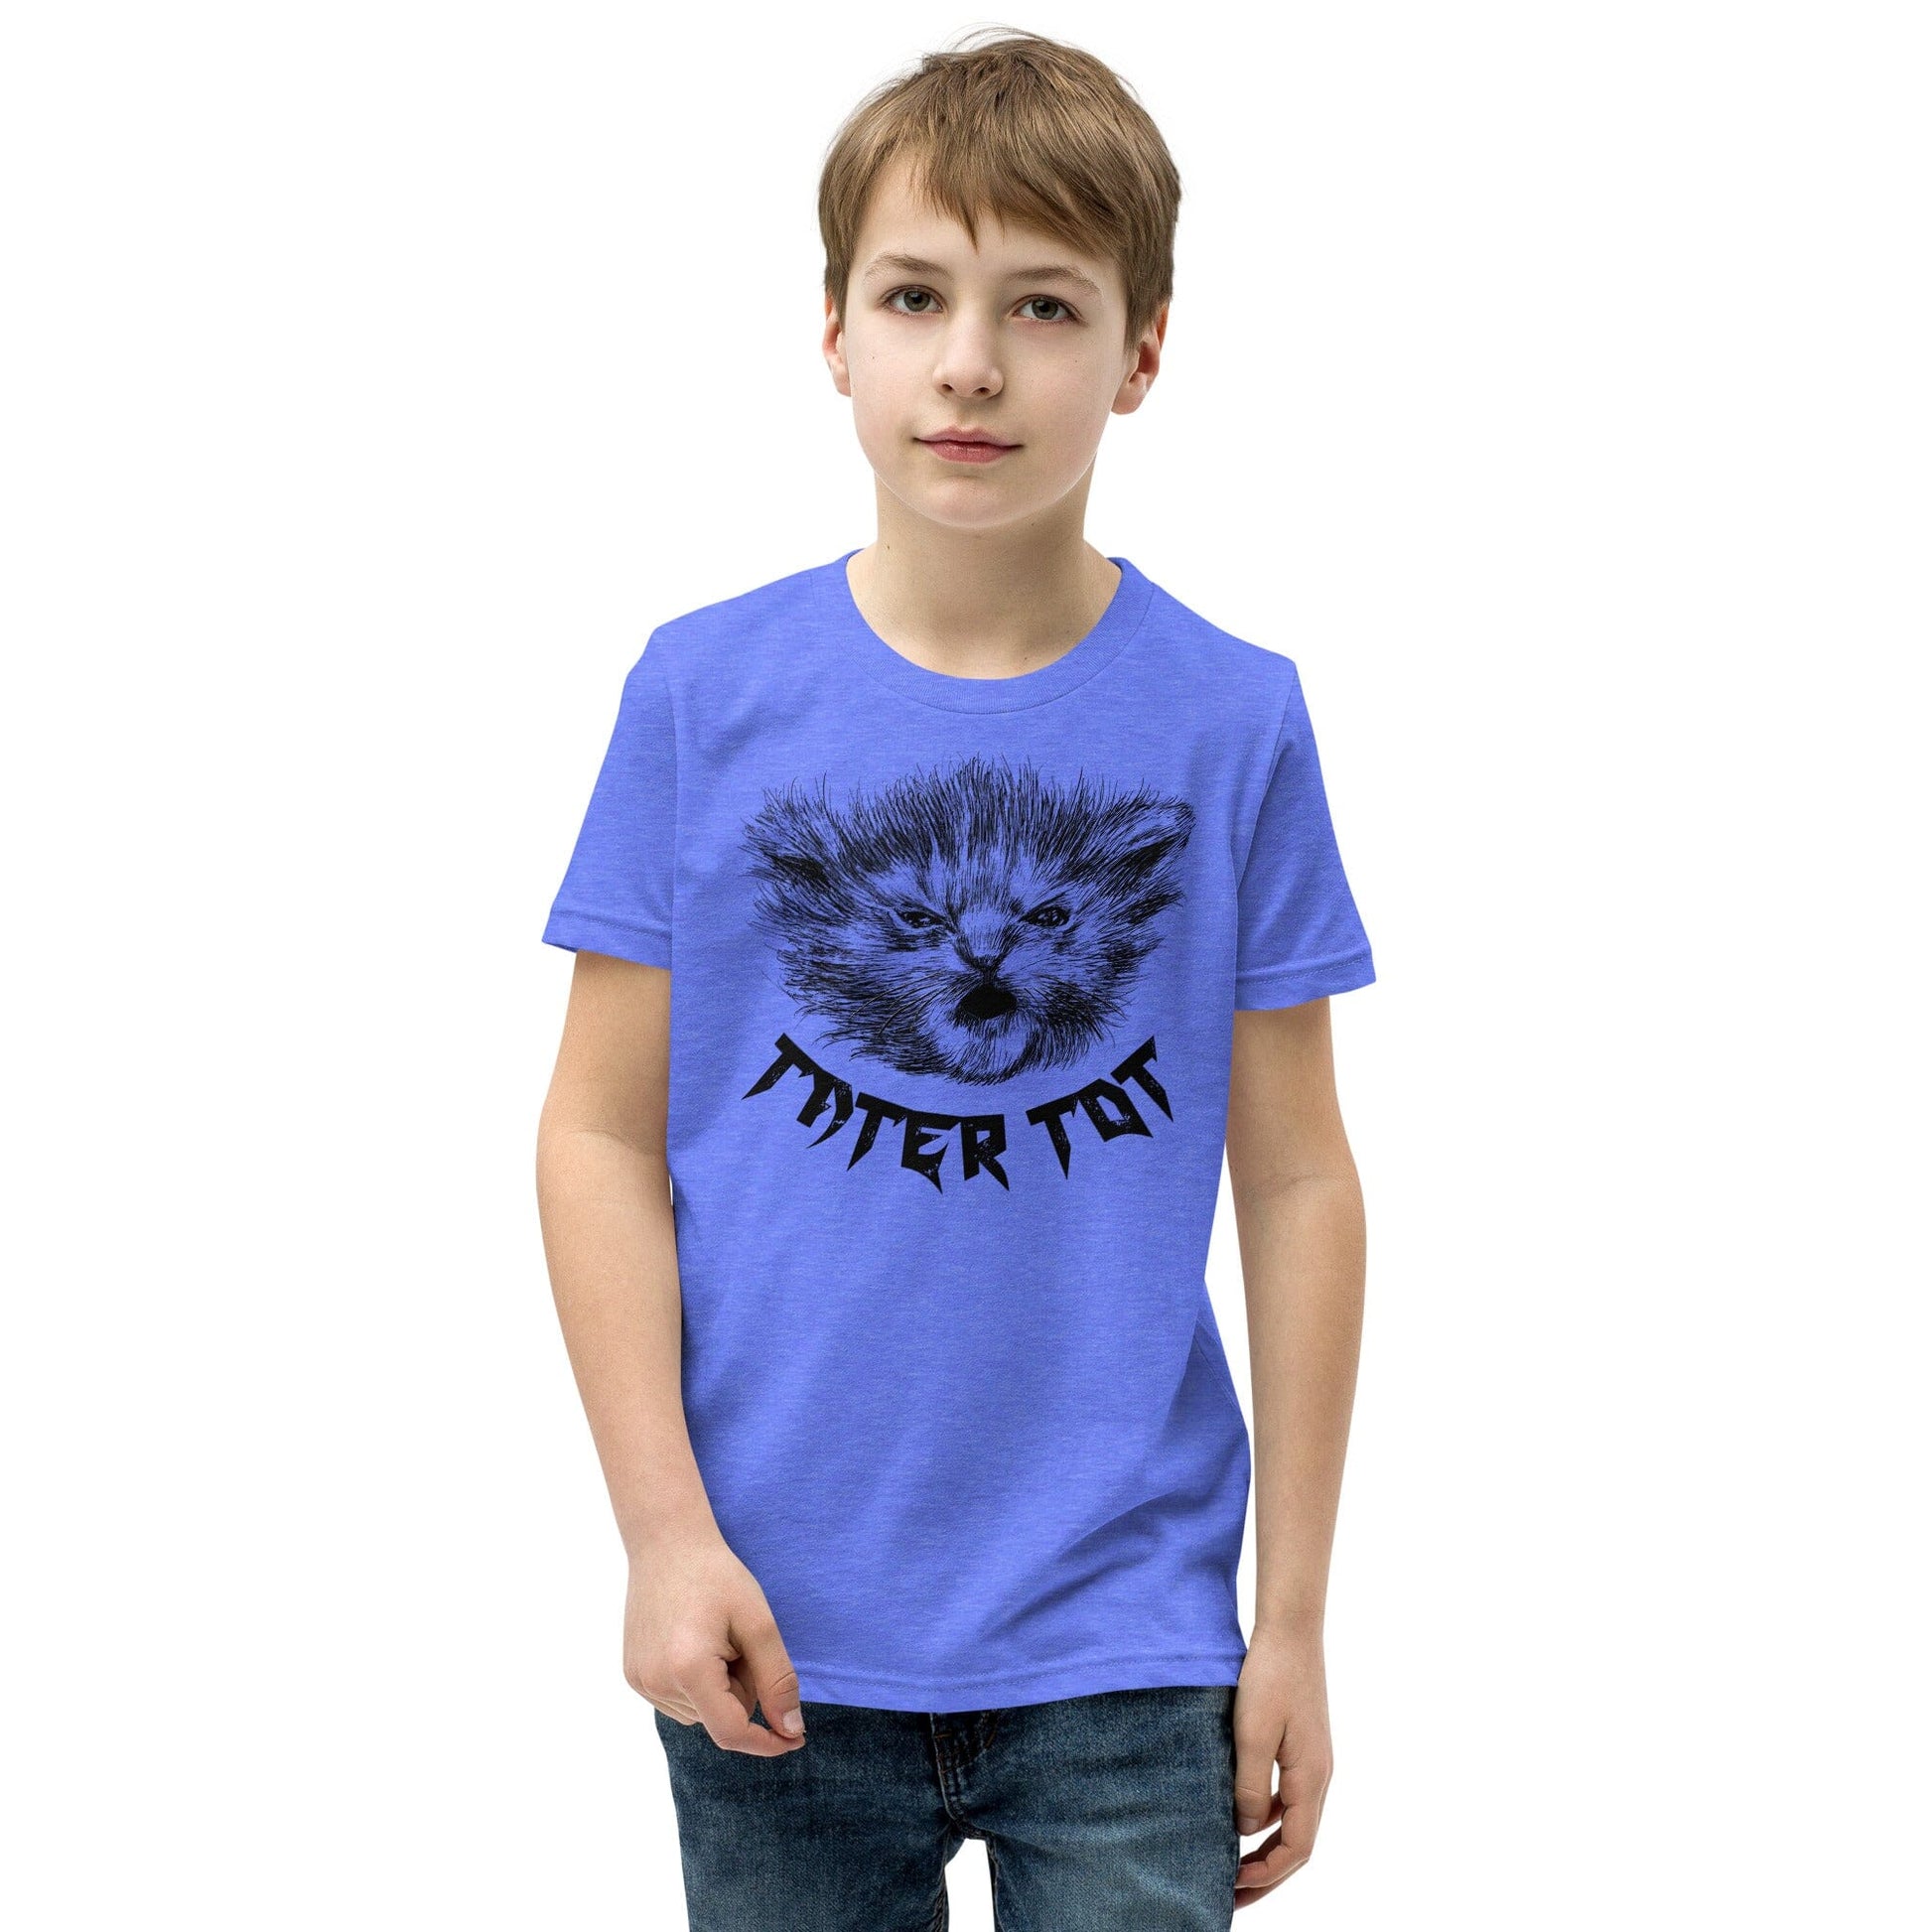 Metal Tater Tot YOUTH T-Shirt [Unfoiled] (All net proceeds go to Kitty CrusAIDe) JoyousJoyfulJoyness Heather Columbia Blue S 